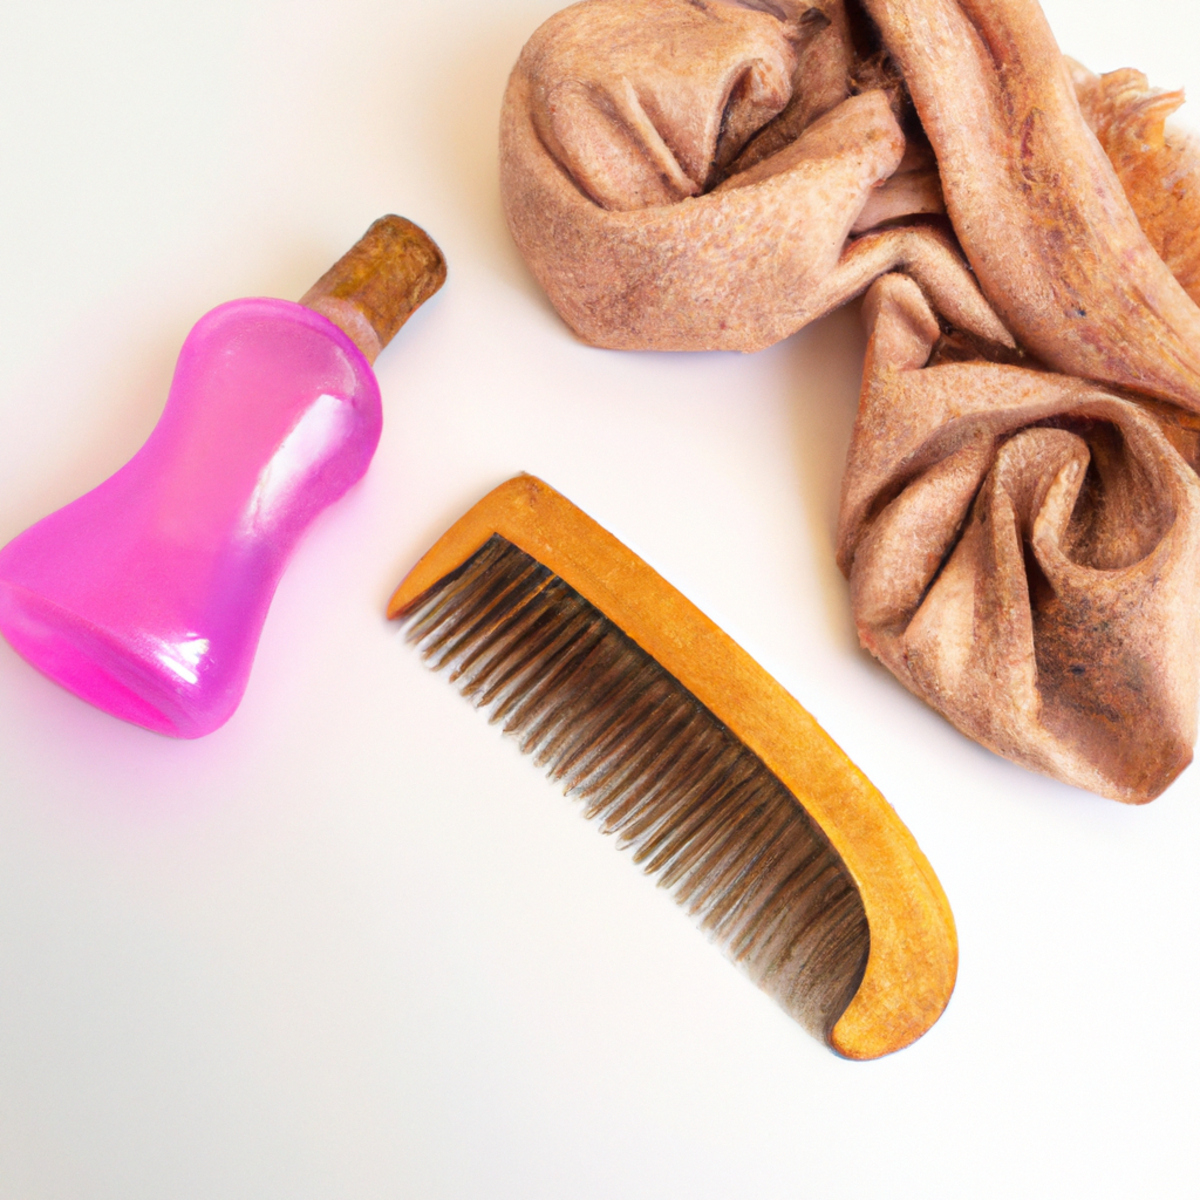 Hair care essentials: wooden brush, wide-tooth comb, silk scarf, and argan oil. Gentle tools and nourishing products for healthy hair.